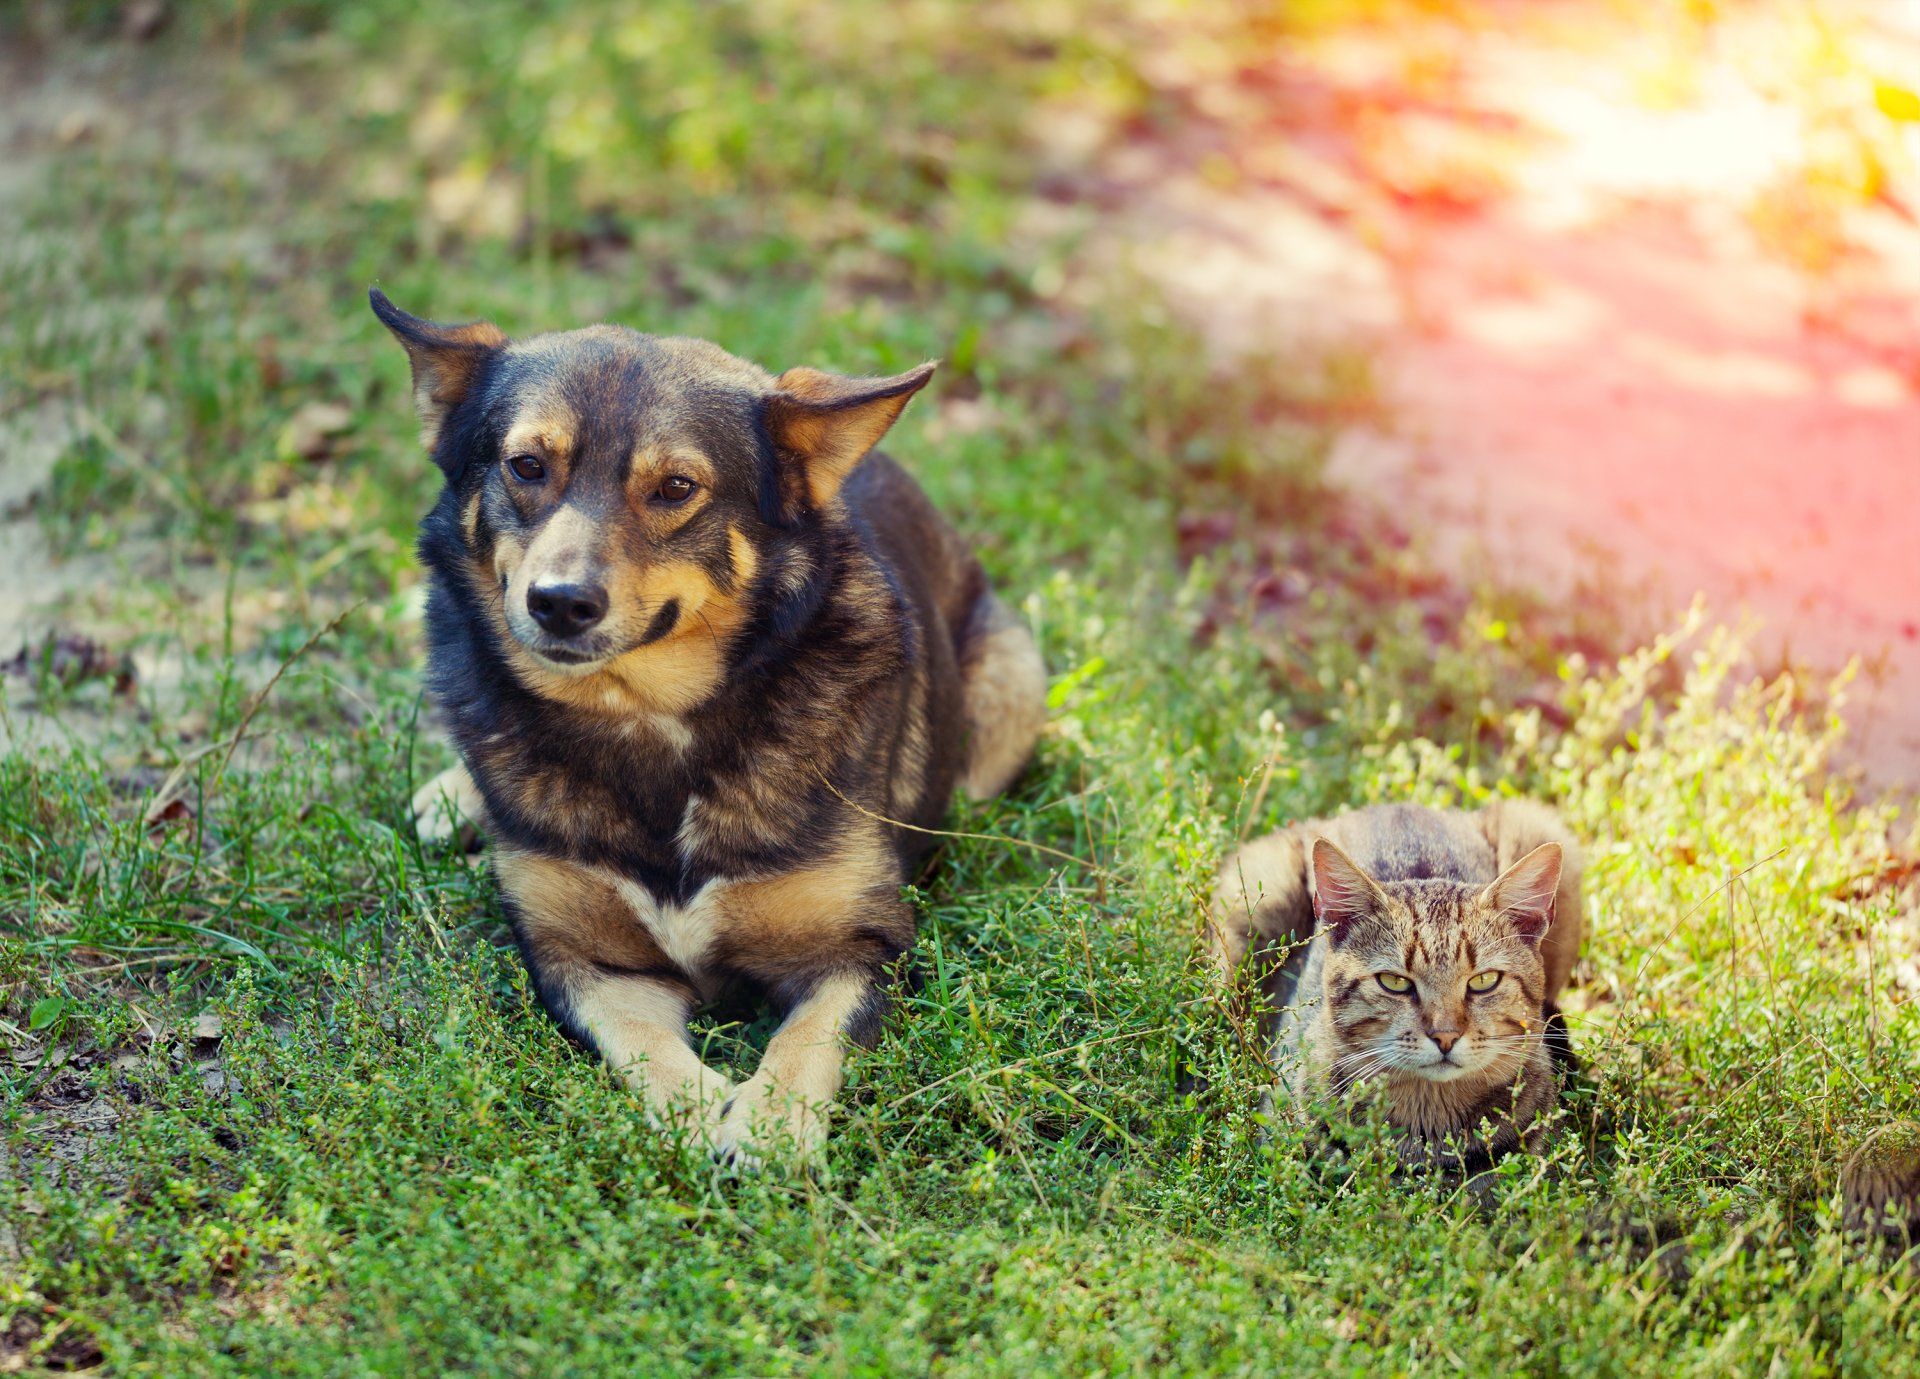 Animals — Cat and Dog on the Grass in Citrus Heights, CA